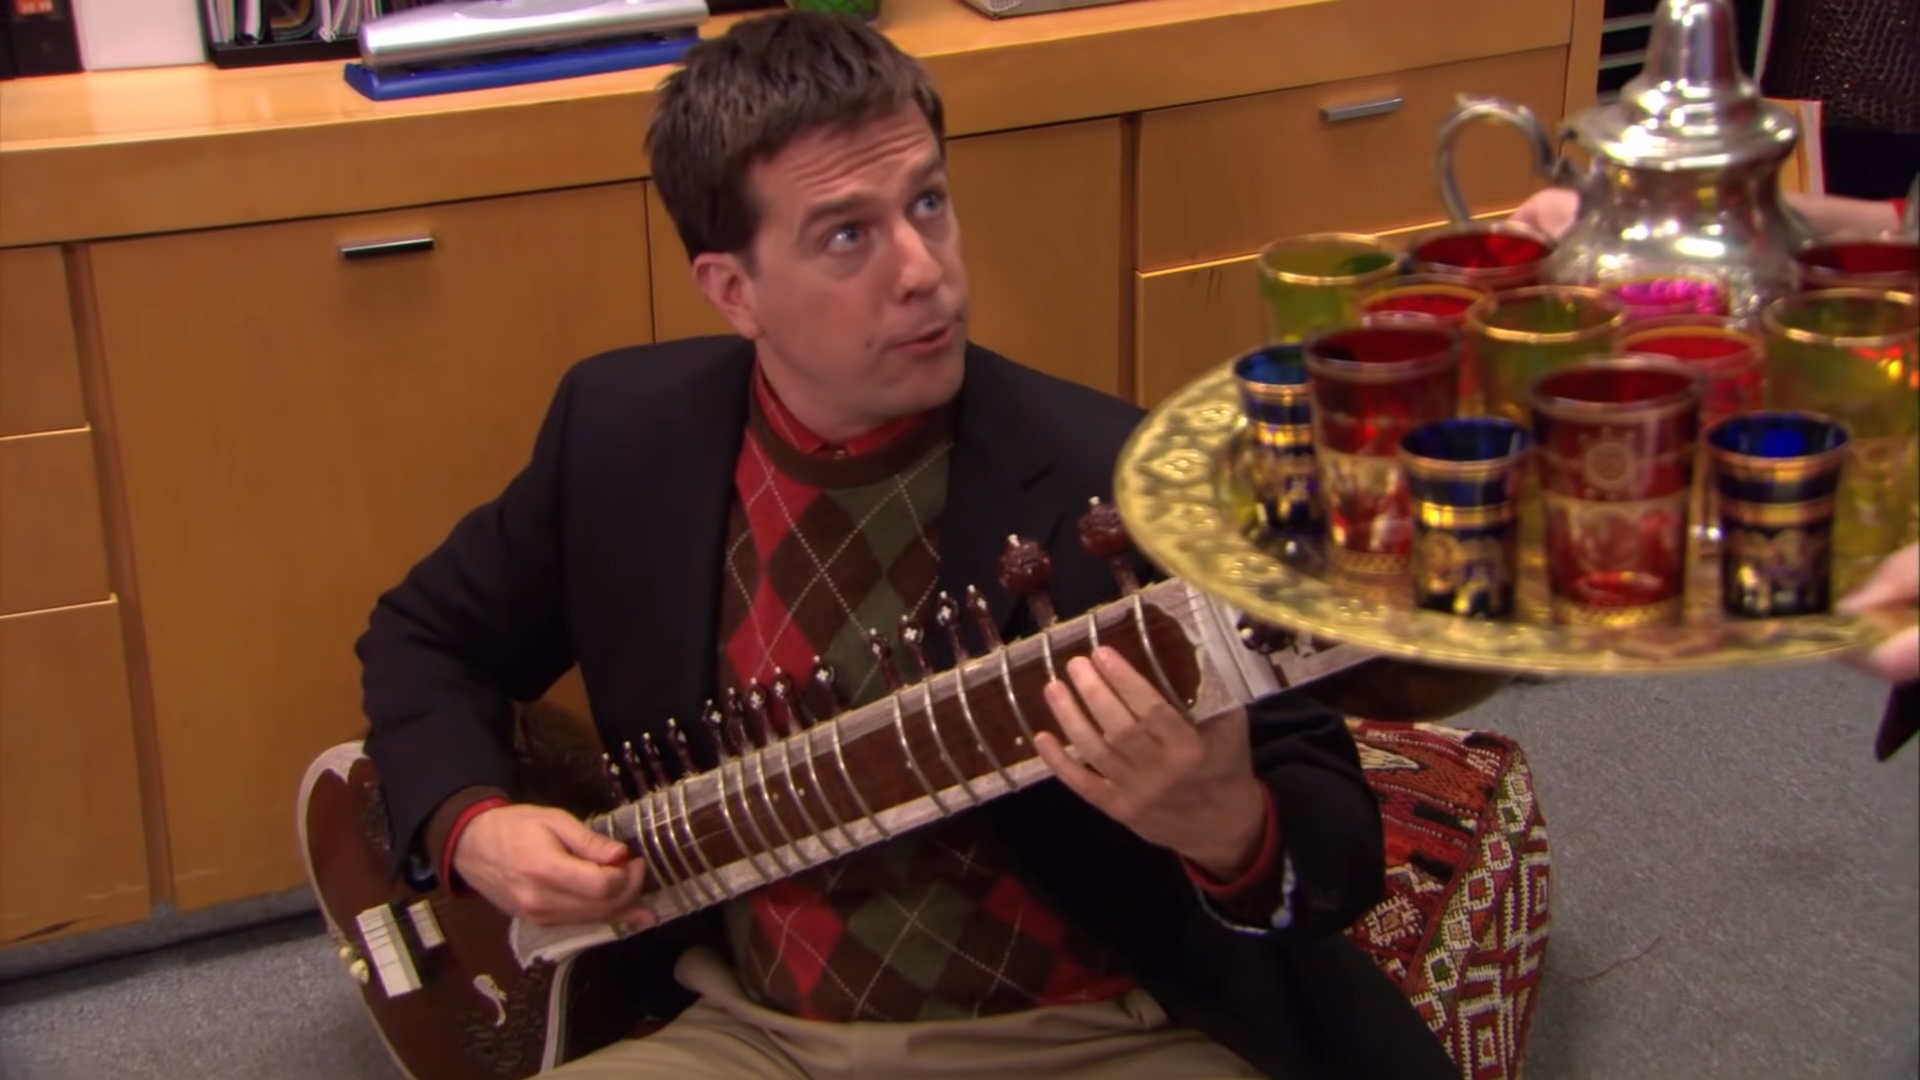 Andy playing a sitar in "The Office."